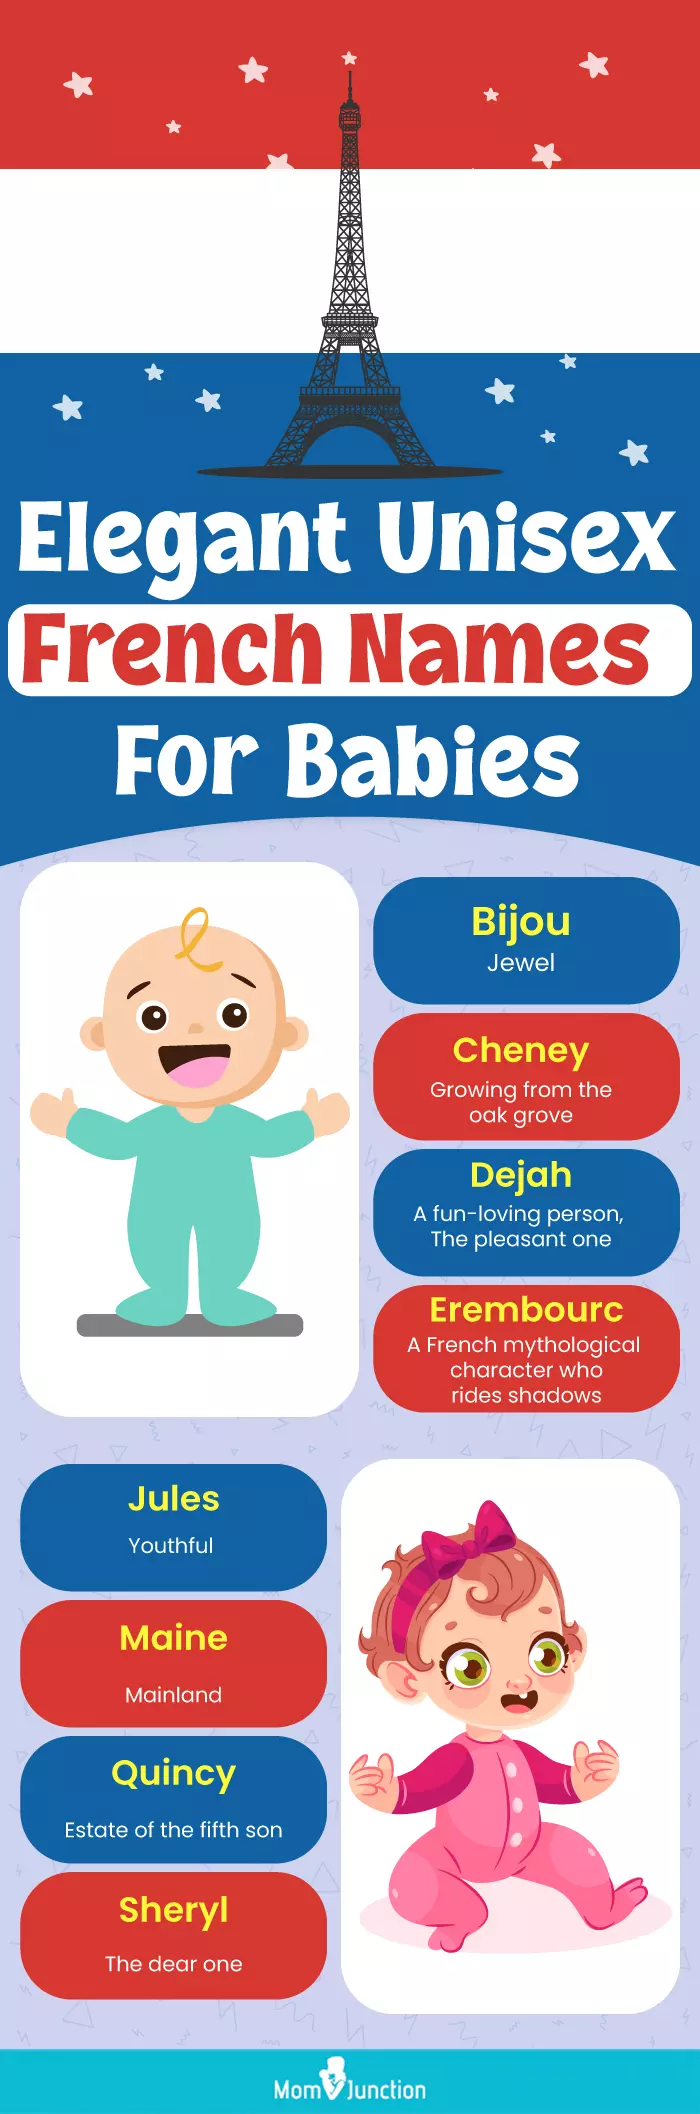 french baby names changes (infographic)